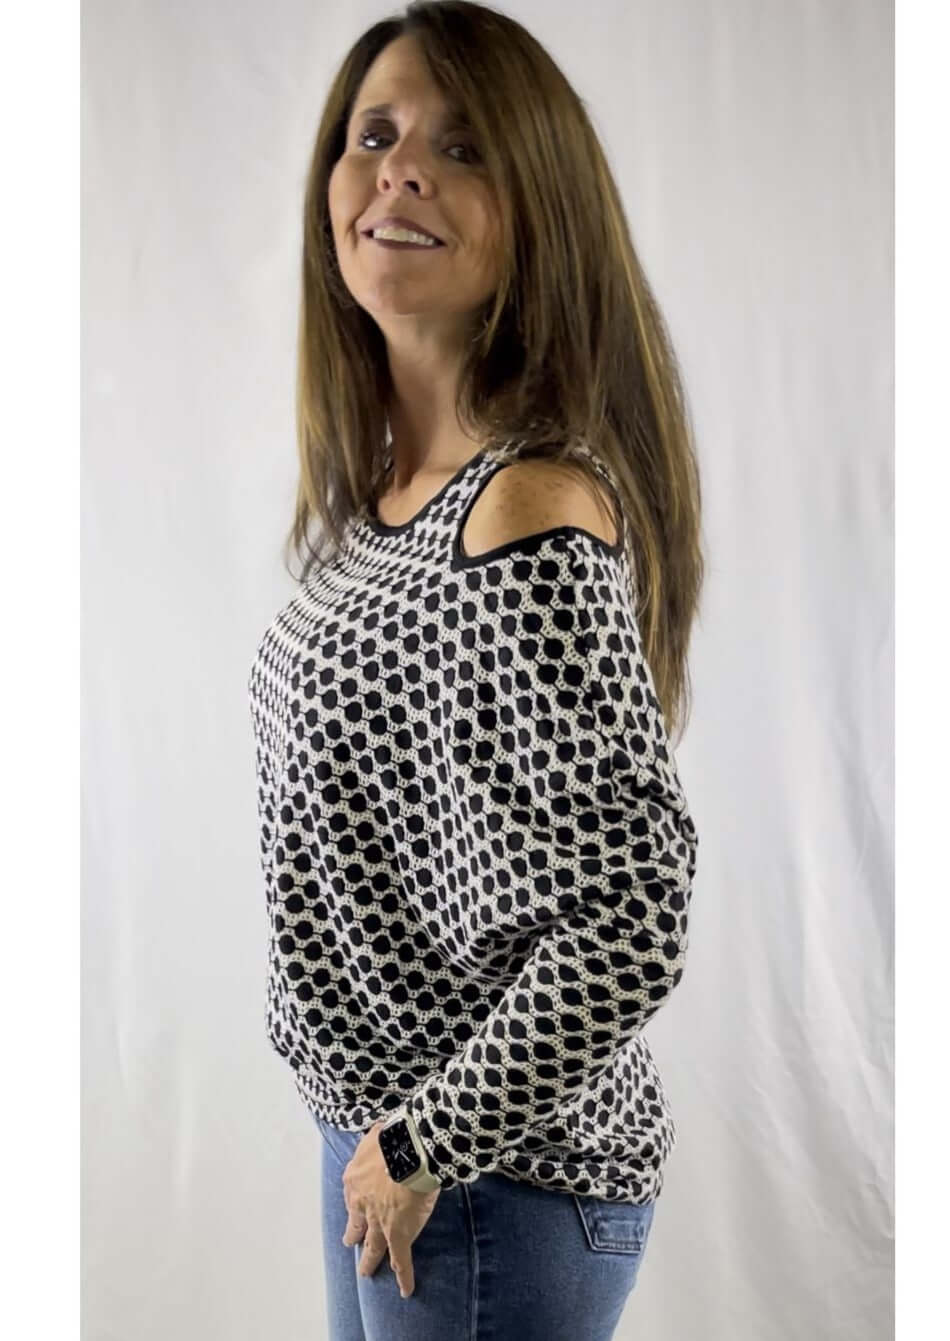 USA Made Ladies' Stylish Cold Shoulder Black & White Dolman Loosely Woven Dolman Top | Classy Cozy Cool Women's Made in America Clothing Boutique